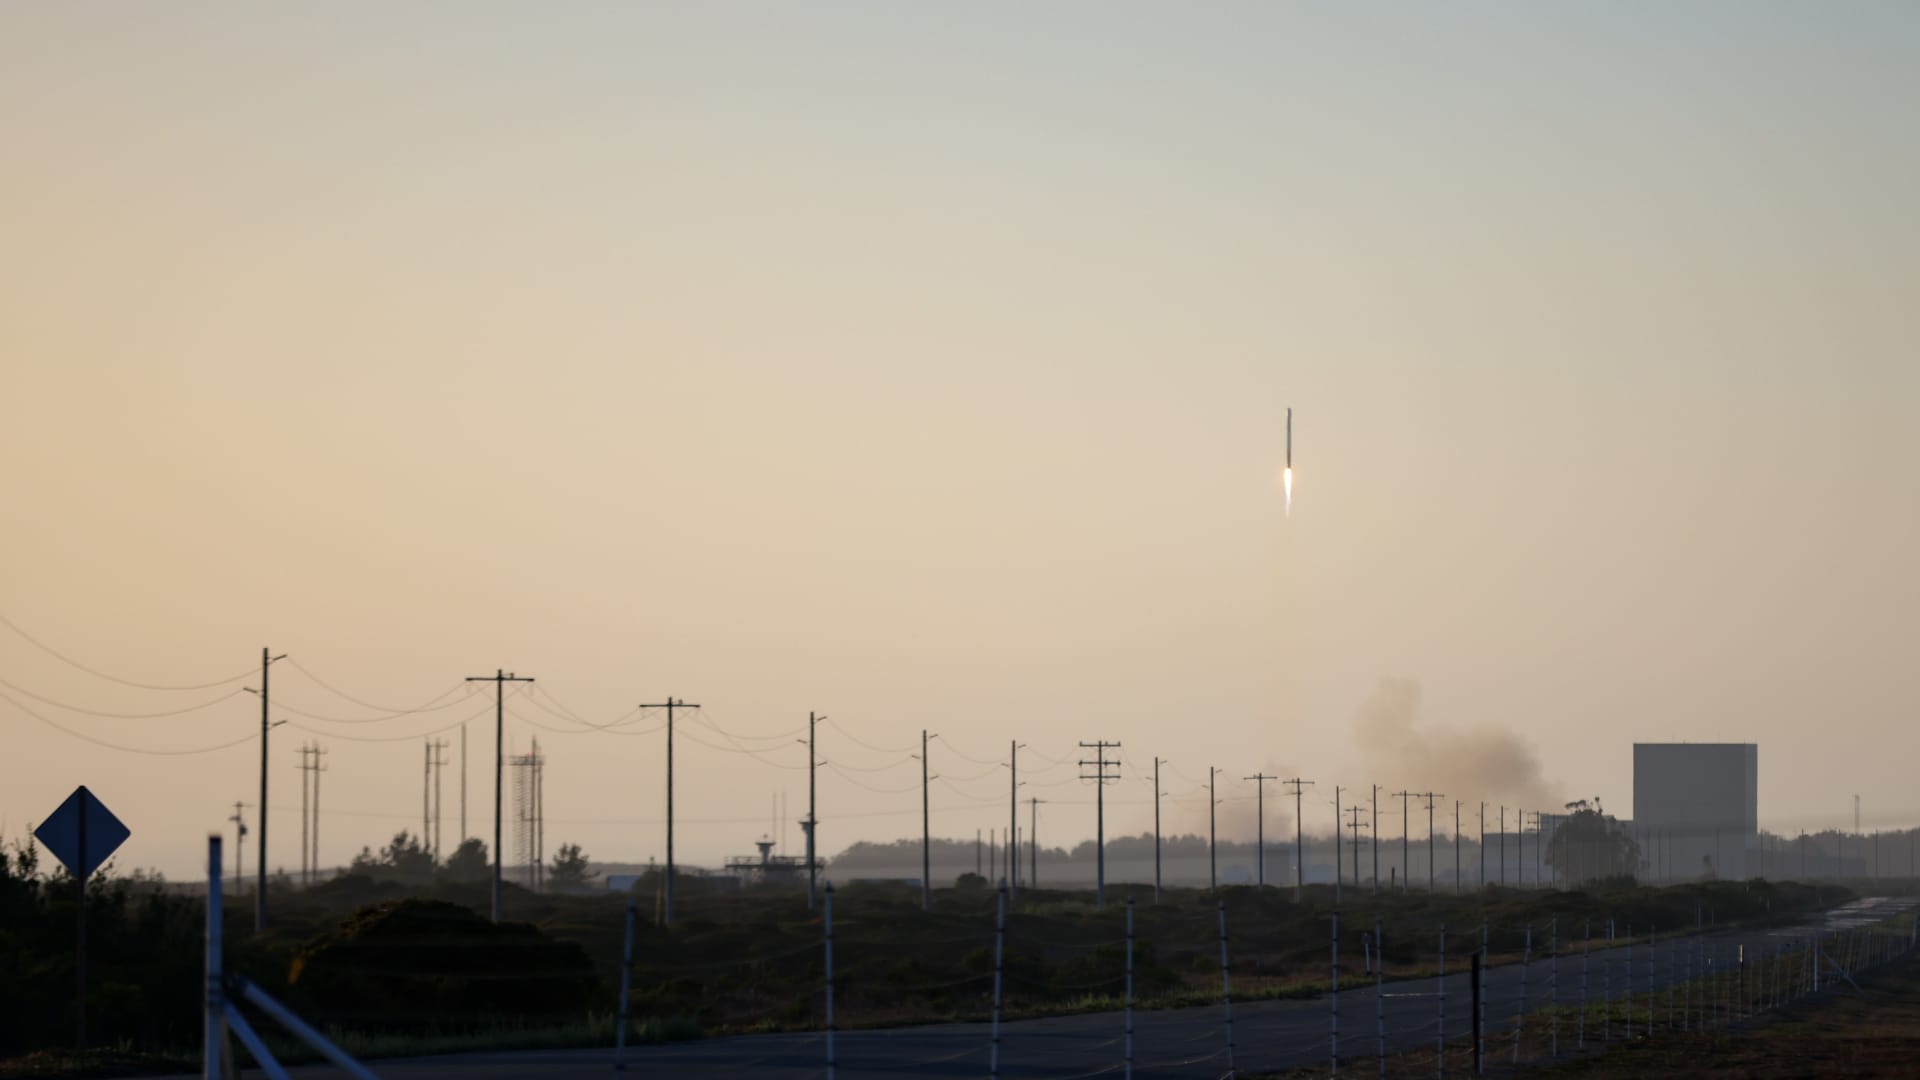 Firefly Aerospace's Alpha rocket accelerates away from SLC-2 at Vandenberg Space Force Base on September 2, 2021.